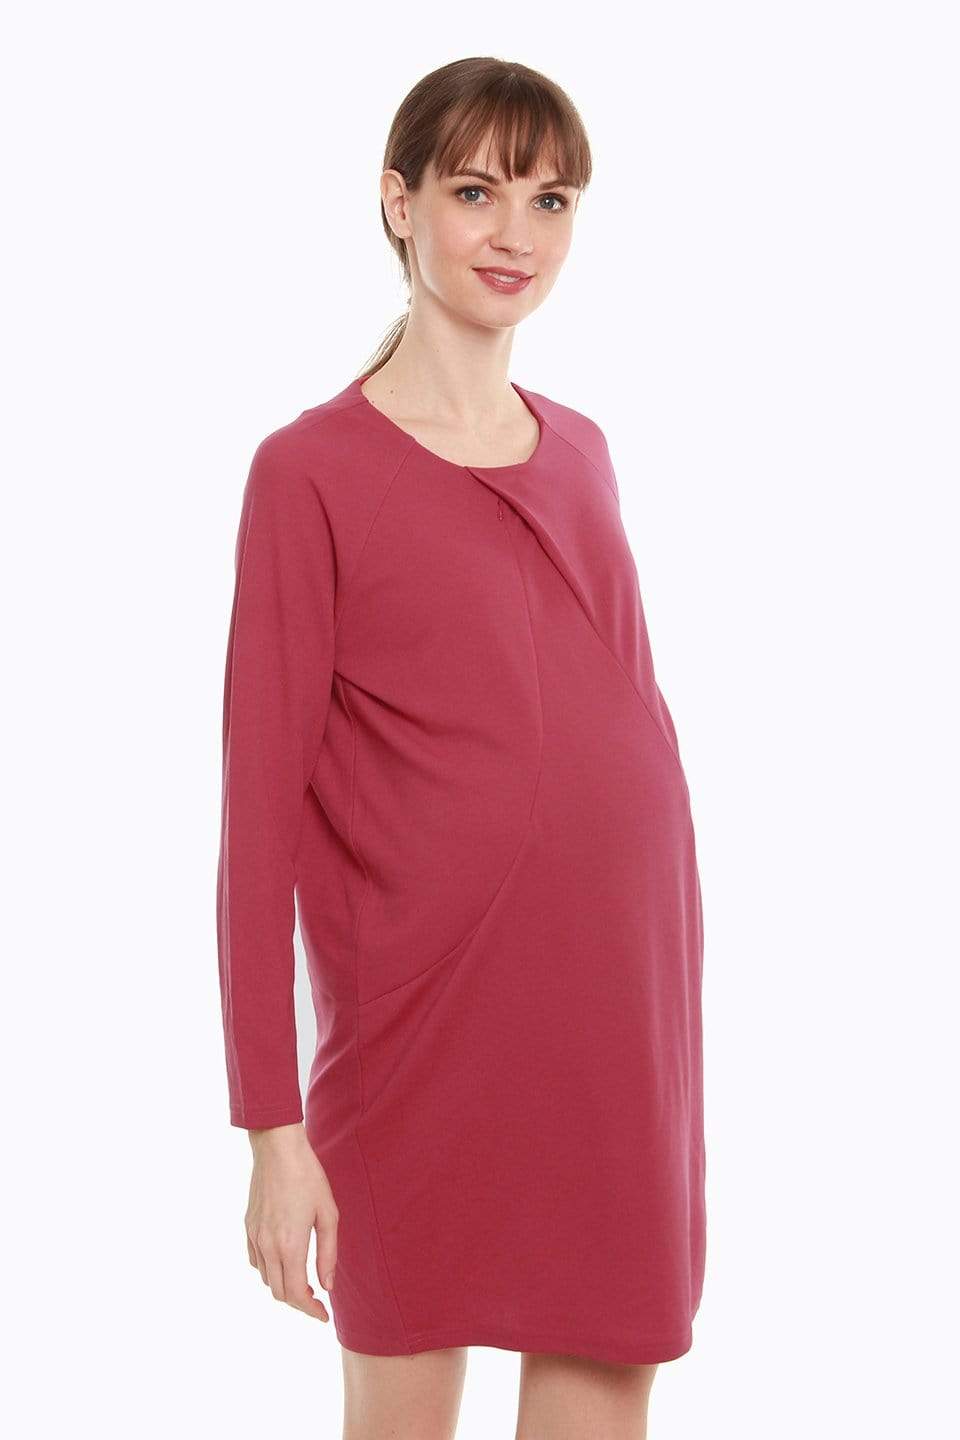 Spring Maternity Cyntherea Maternity Dress Red